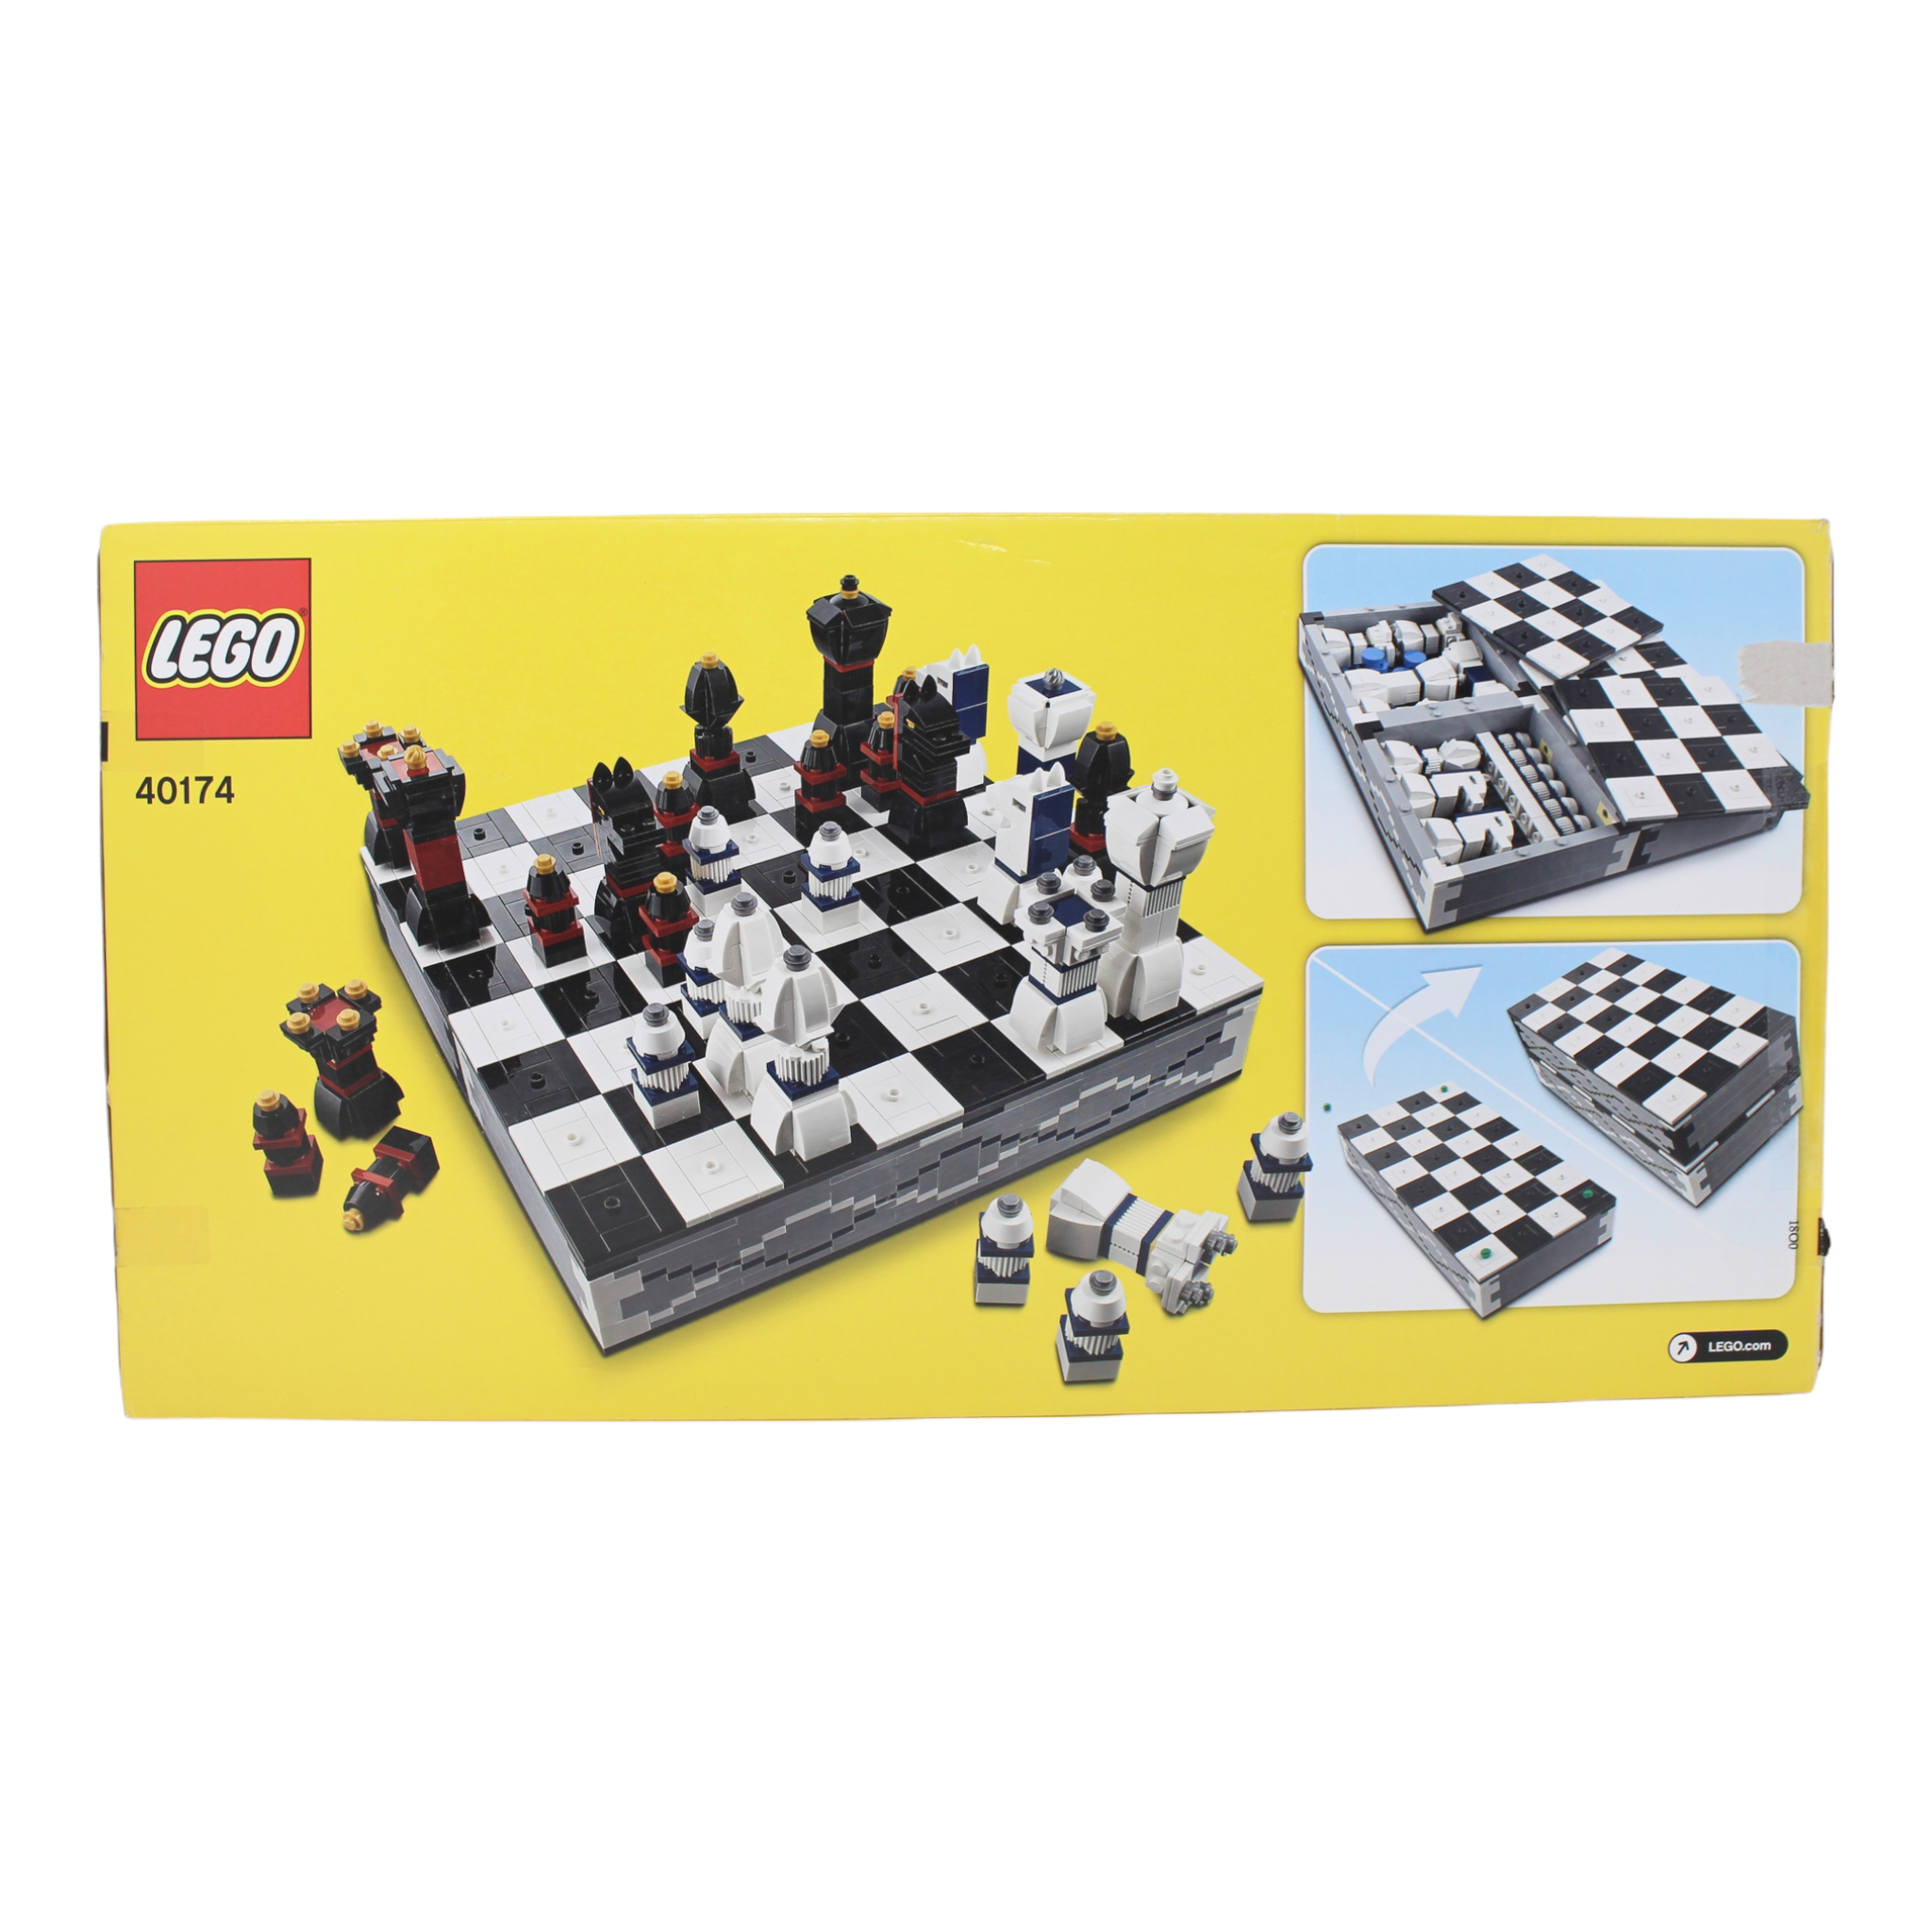 LEGO Miscellaneous: LEGO Chess (40174) for sale online